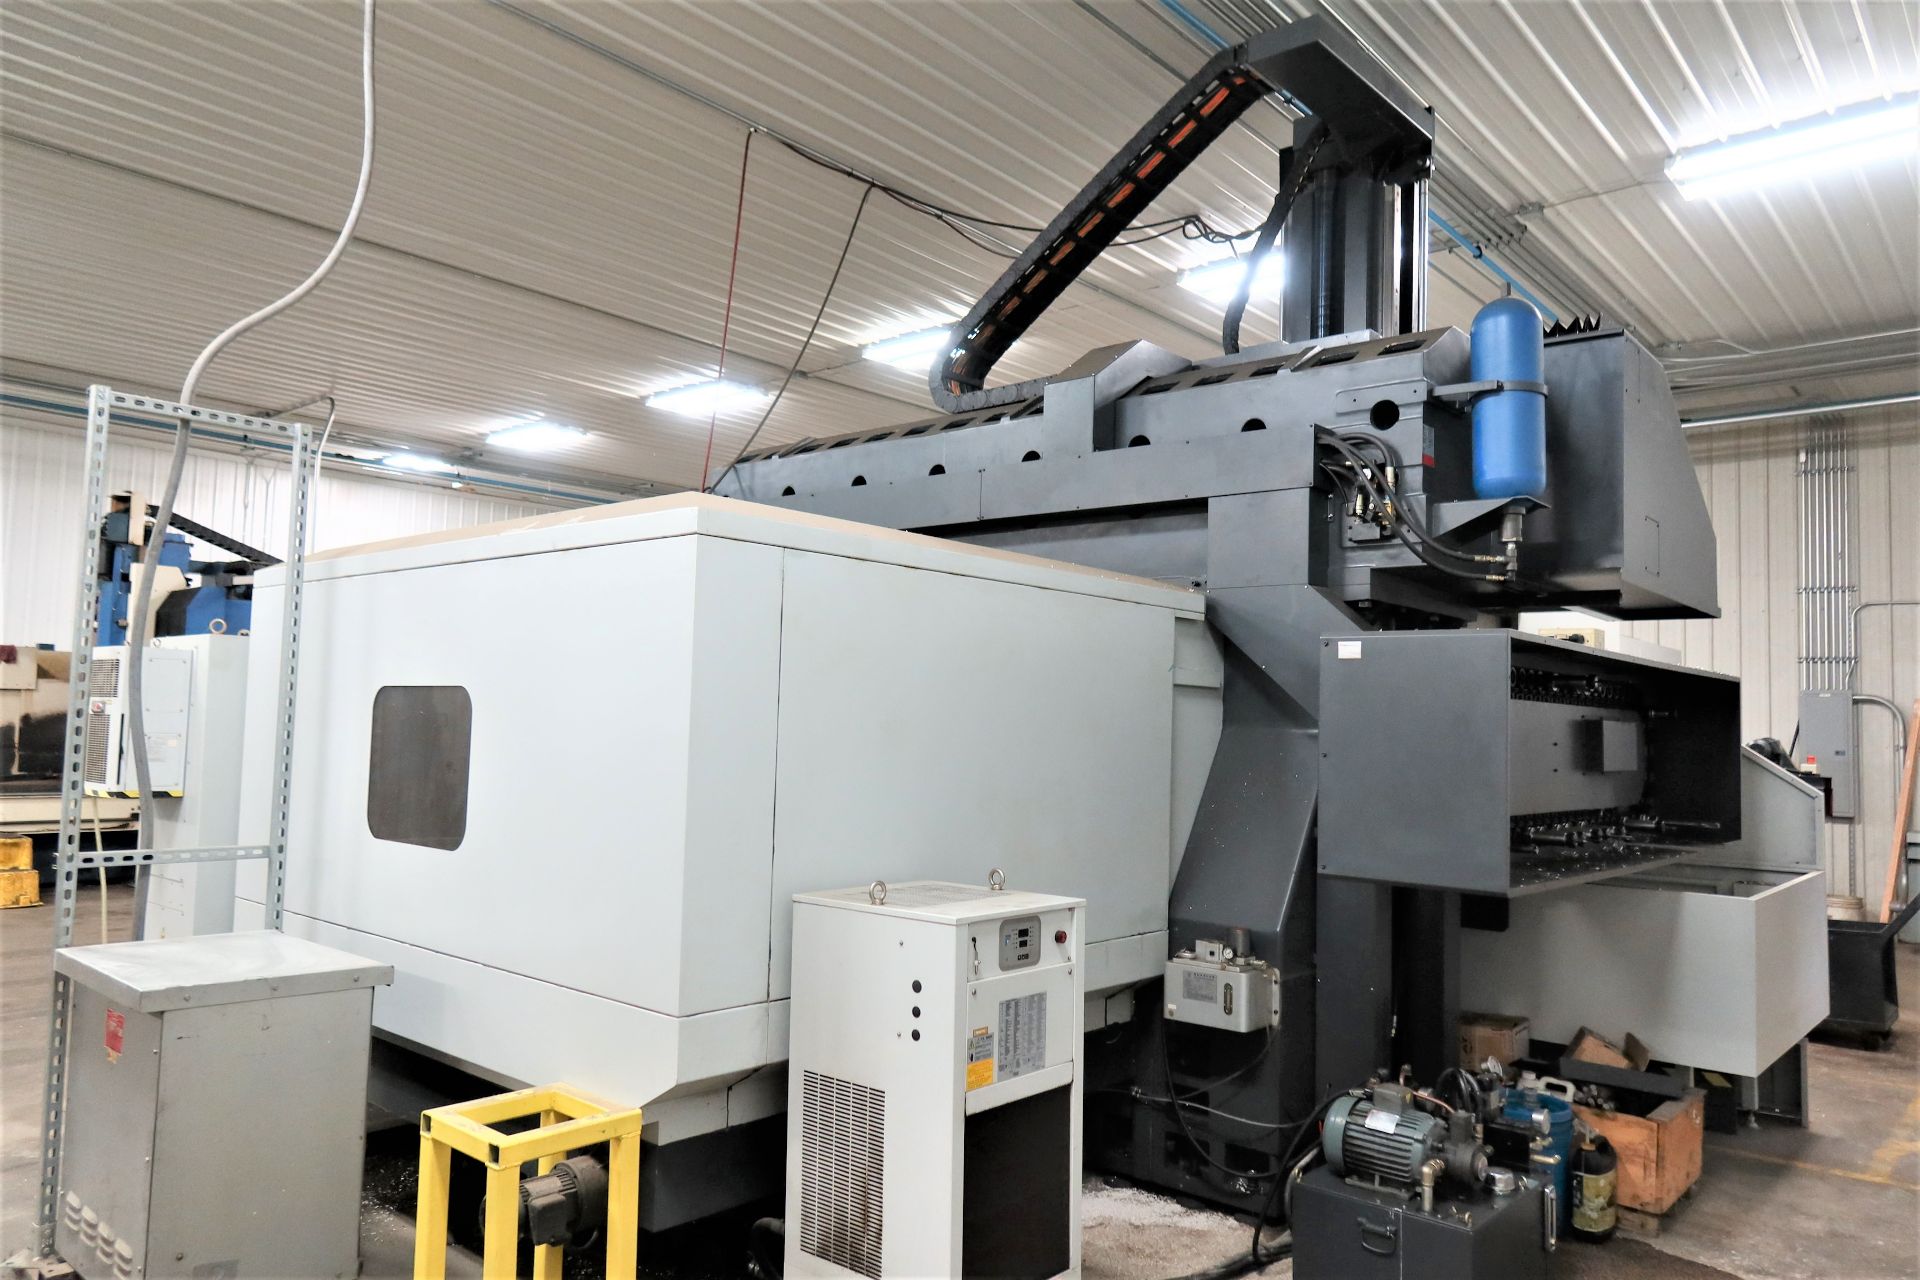 SOLD SOLD SOLD Feeler Model FV-3224 Double Column CNC Bridge Mill, New 2015 - Image 10 of 17